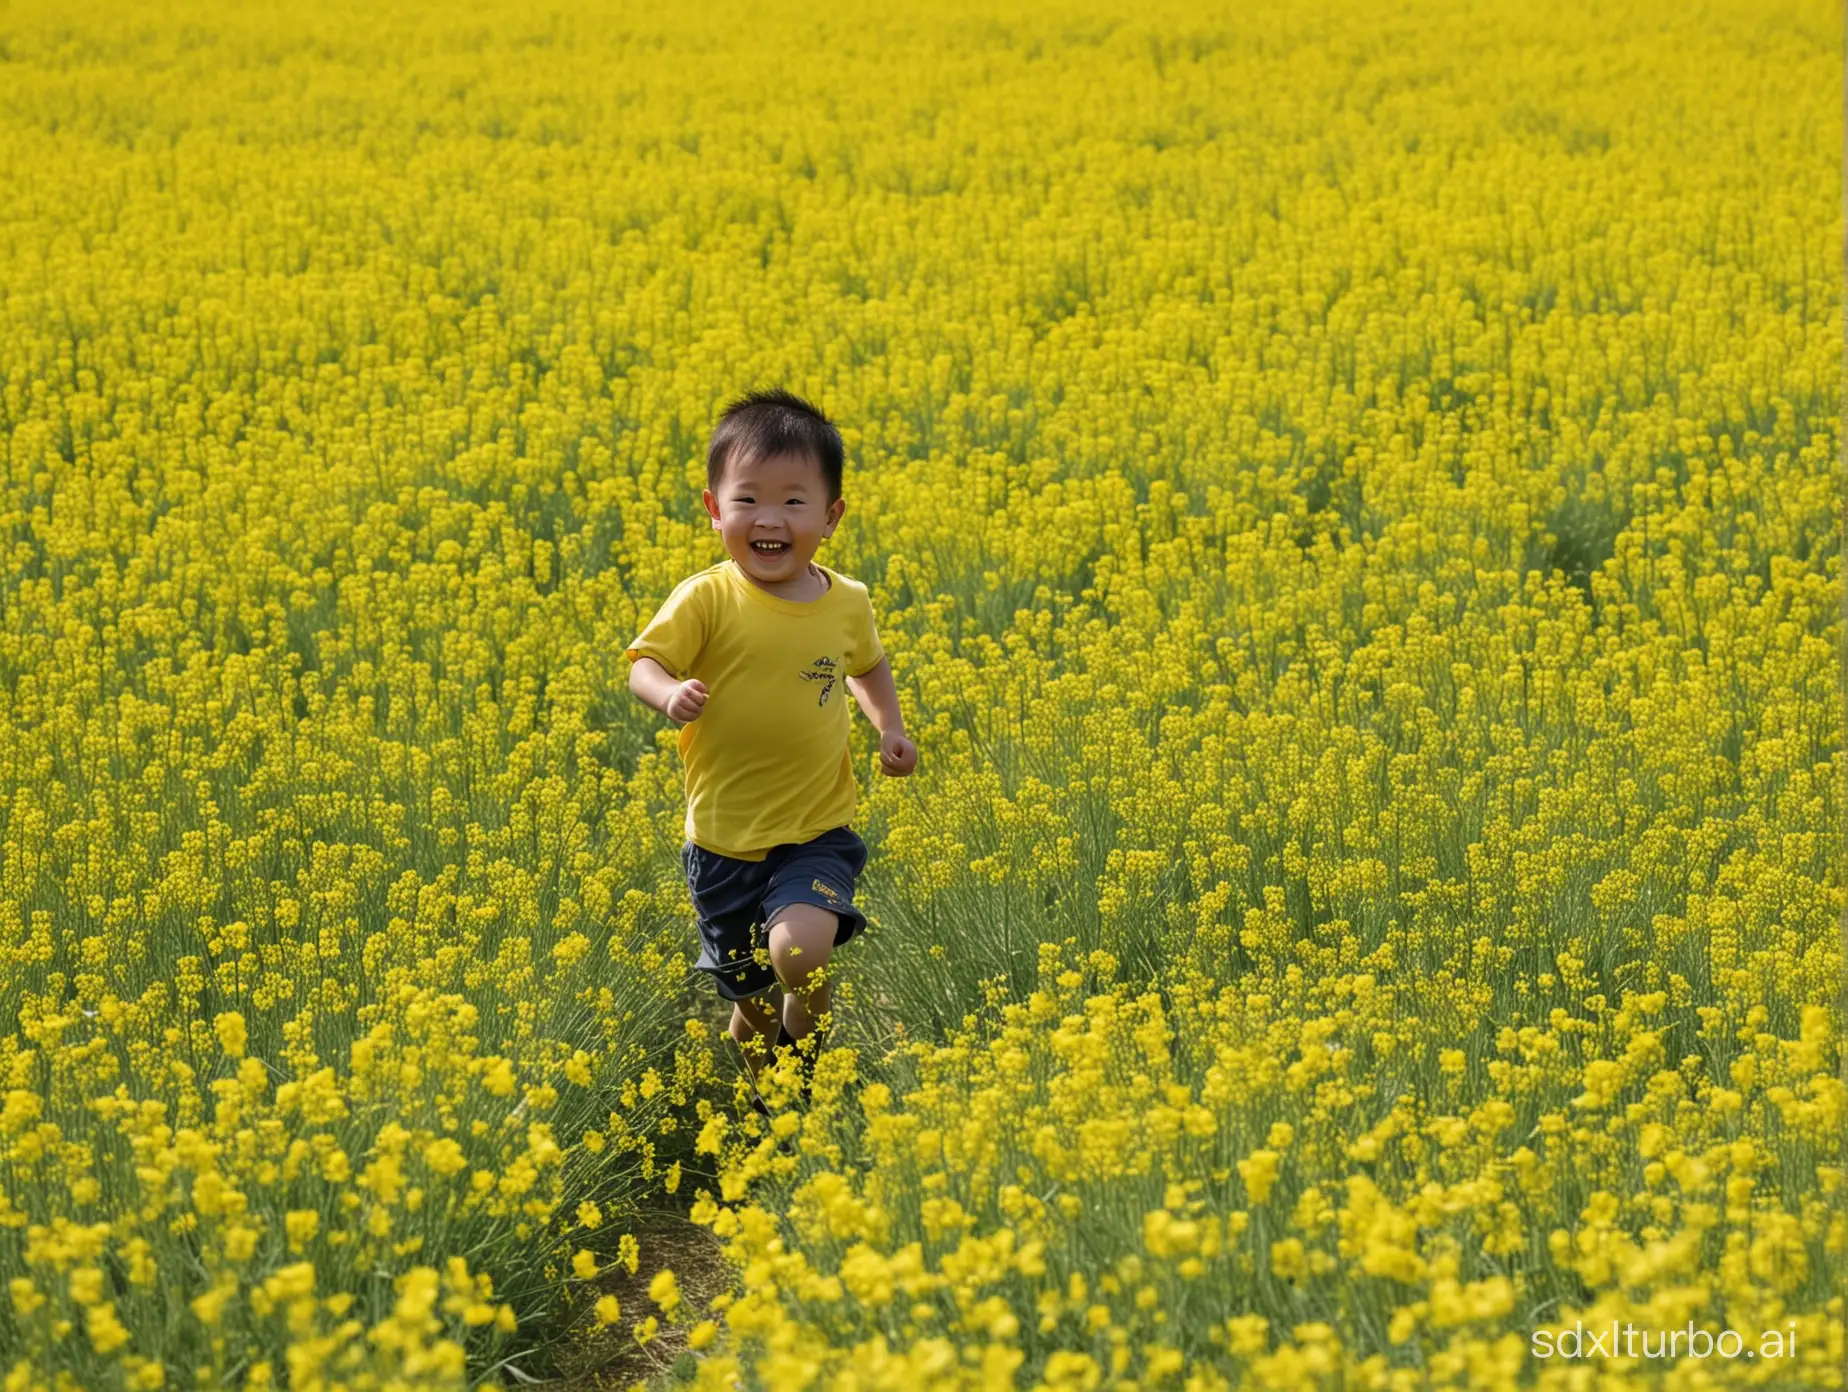 A three-year-old Chinese boy is happily running in a field of rapeseed.